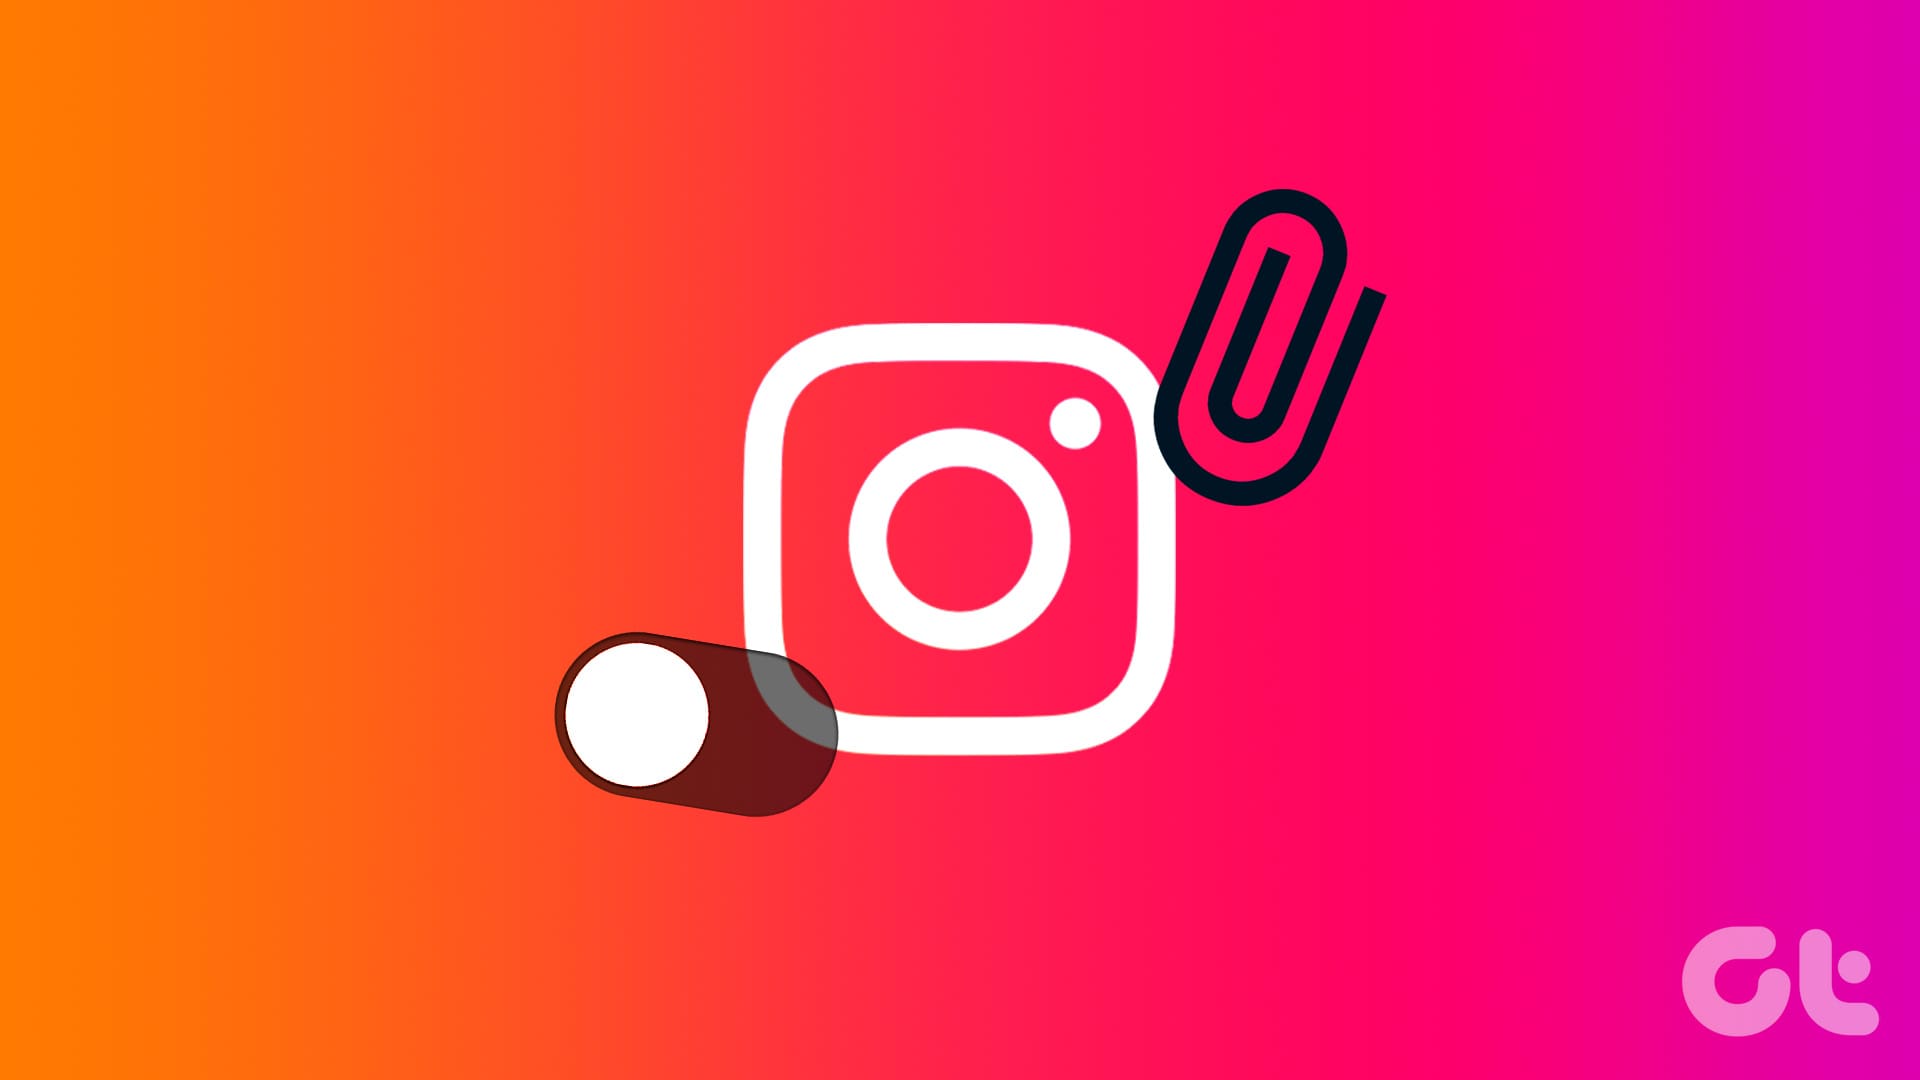 How to Turn off Link History on Instagram